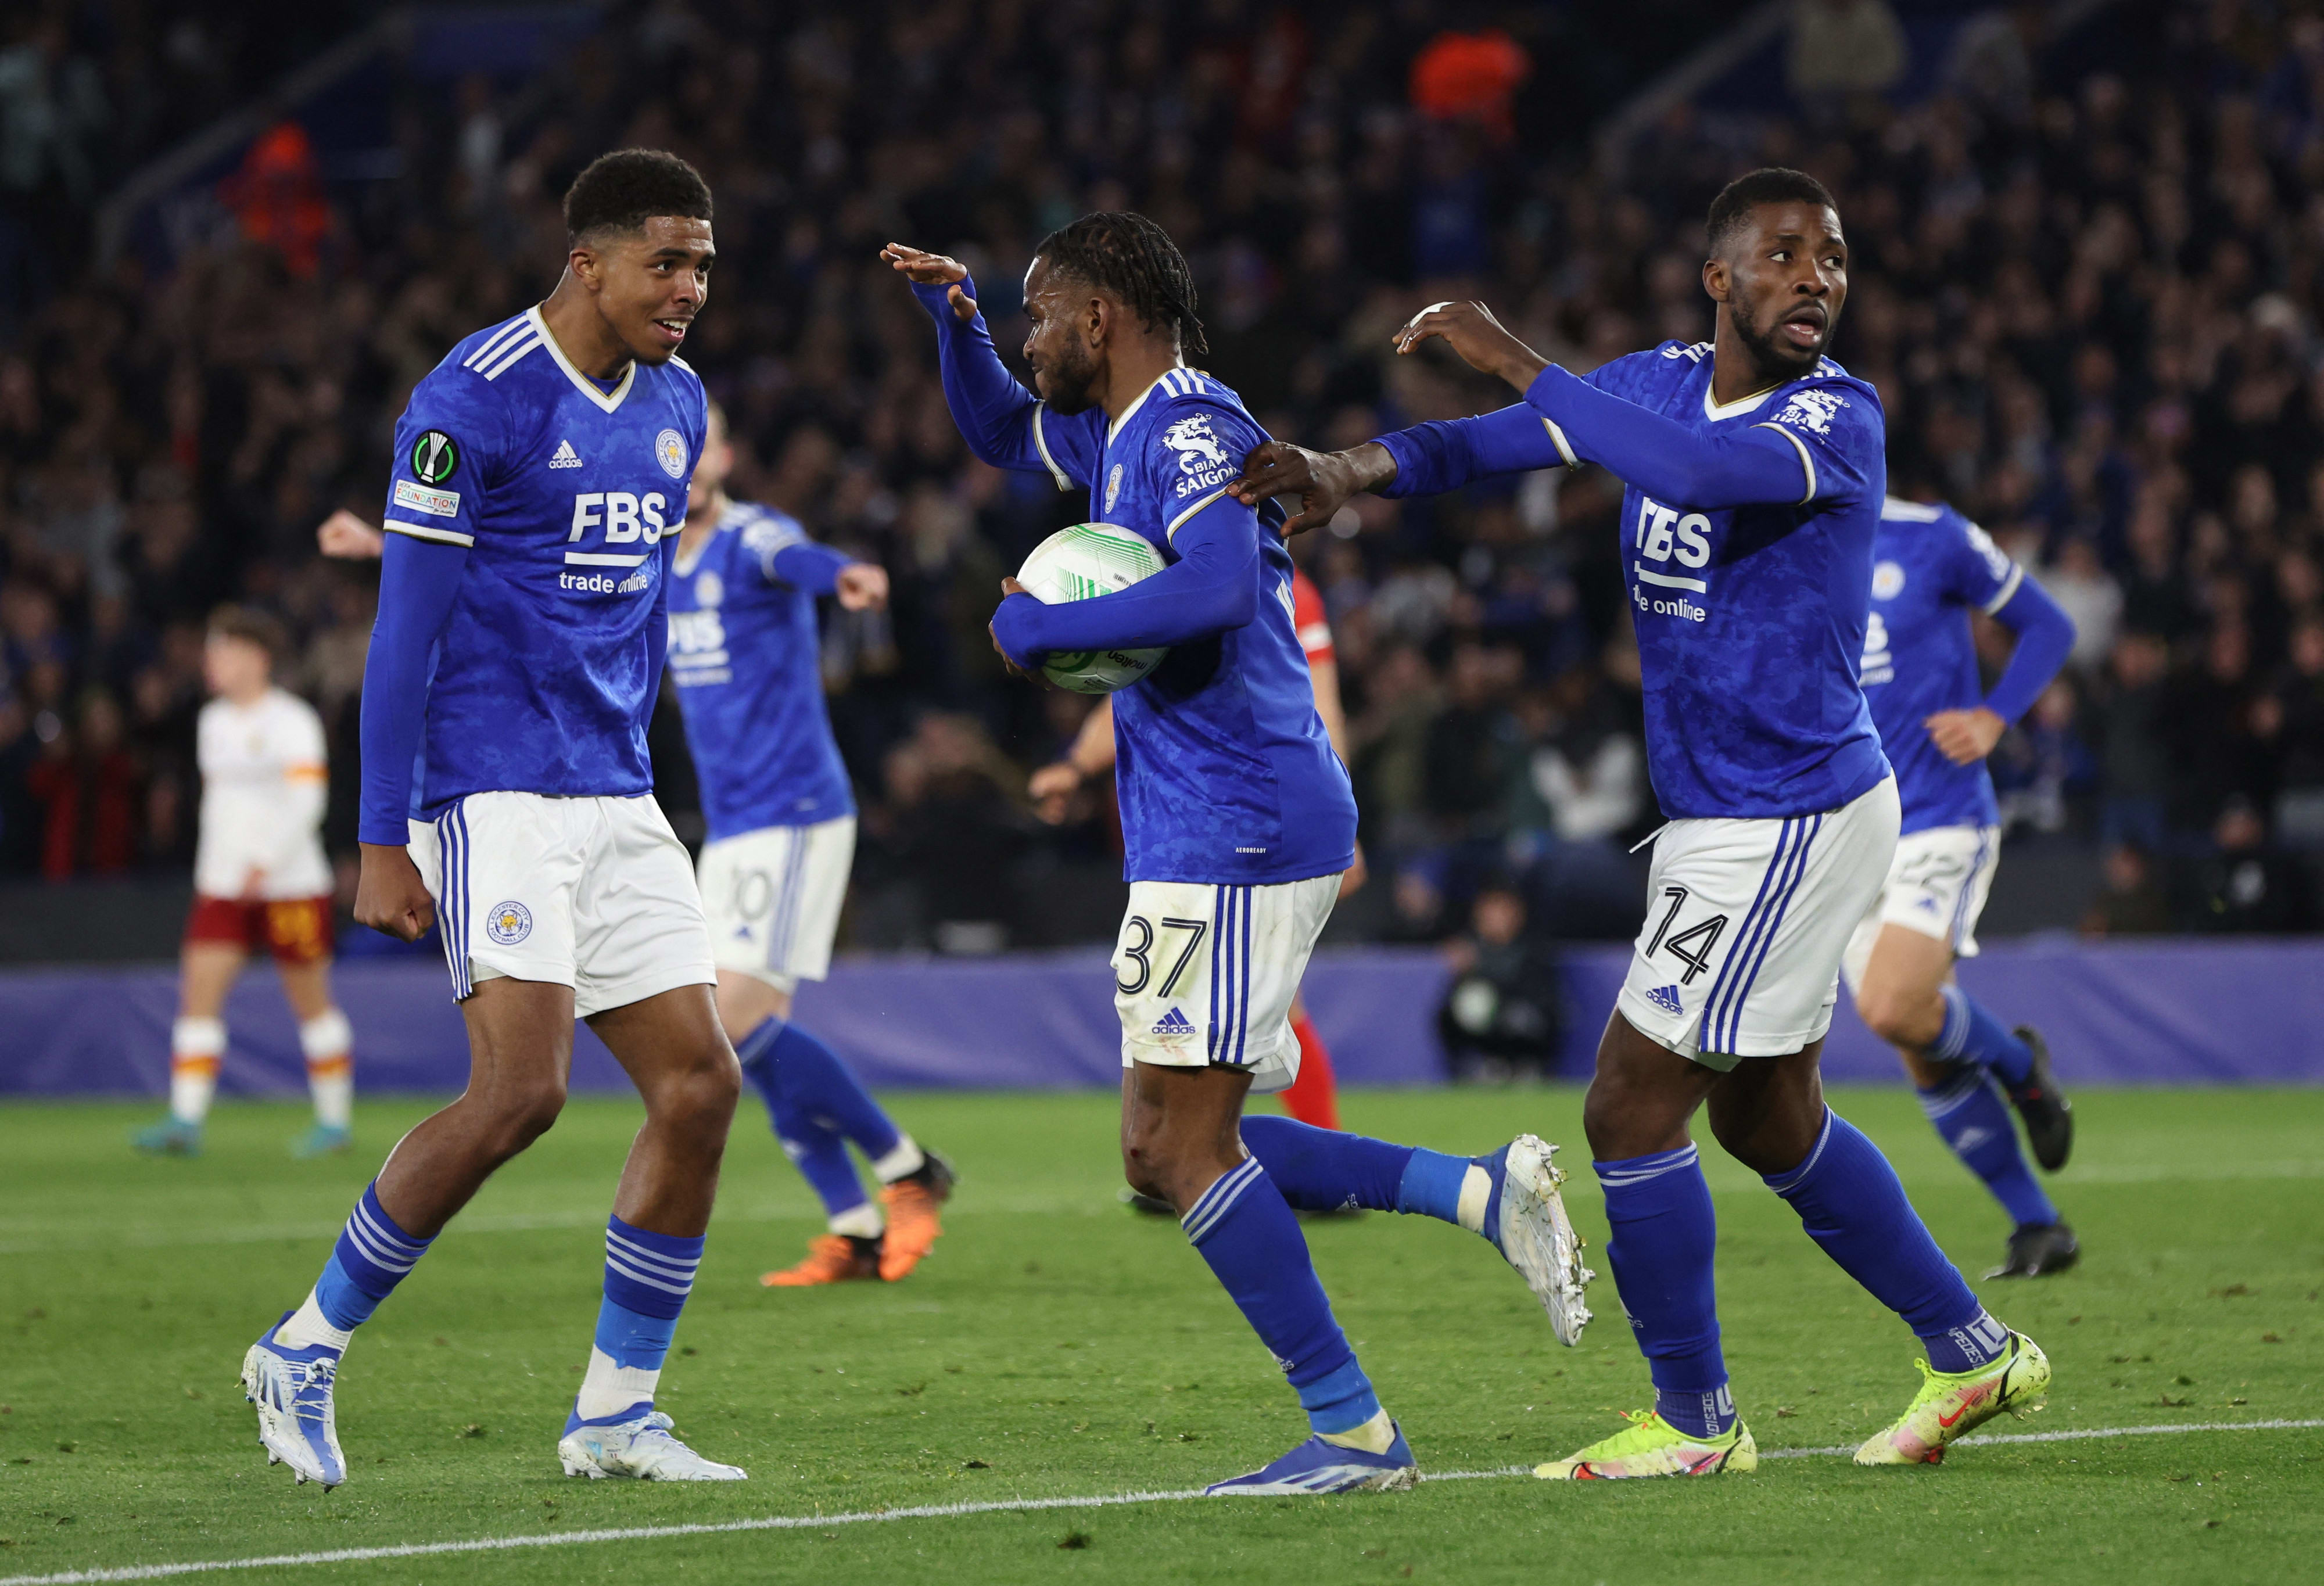 Leicester City players celebrate with Admola Lockman (center)